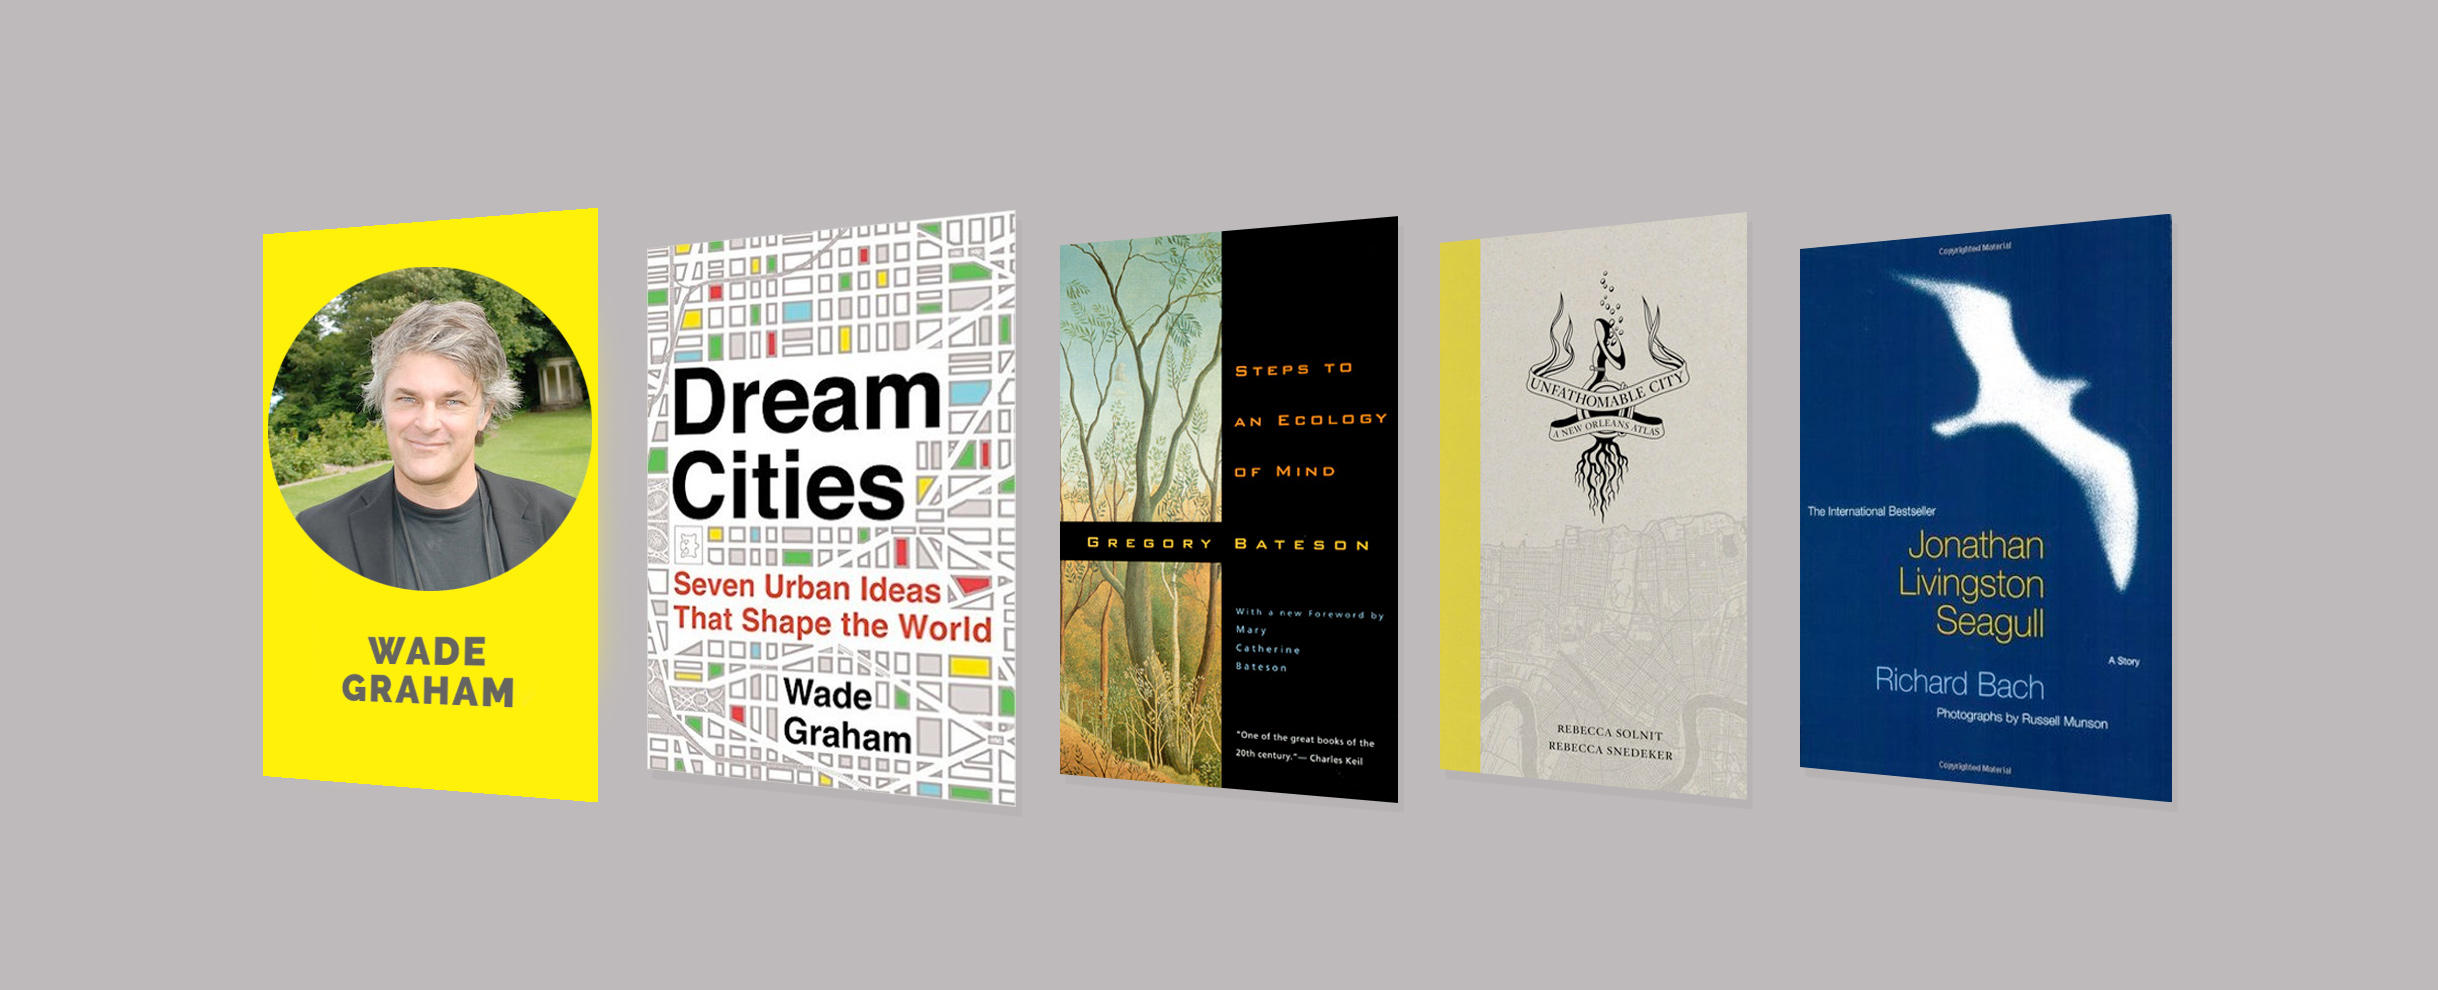 Interview with Wade Graham, author of Dream Cities: Seven Urban Ideas That Shape the World